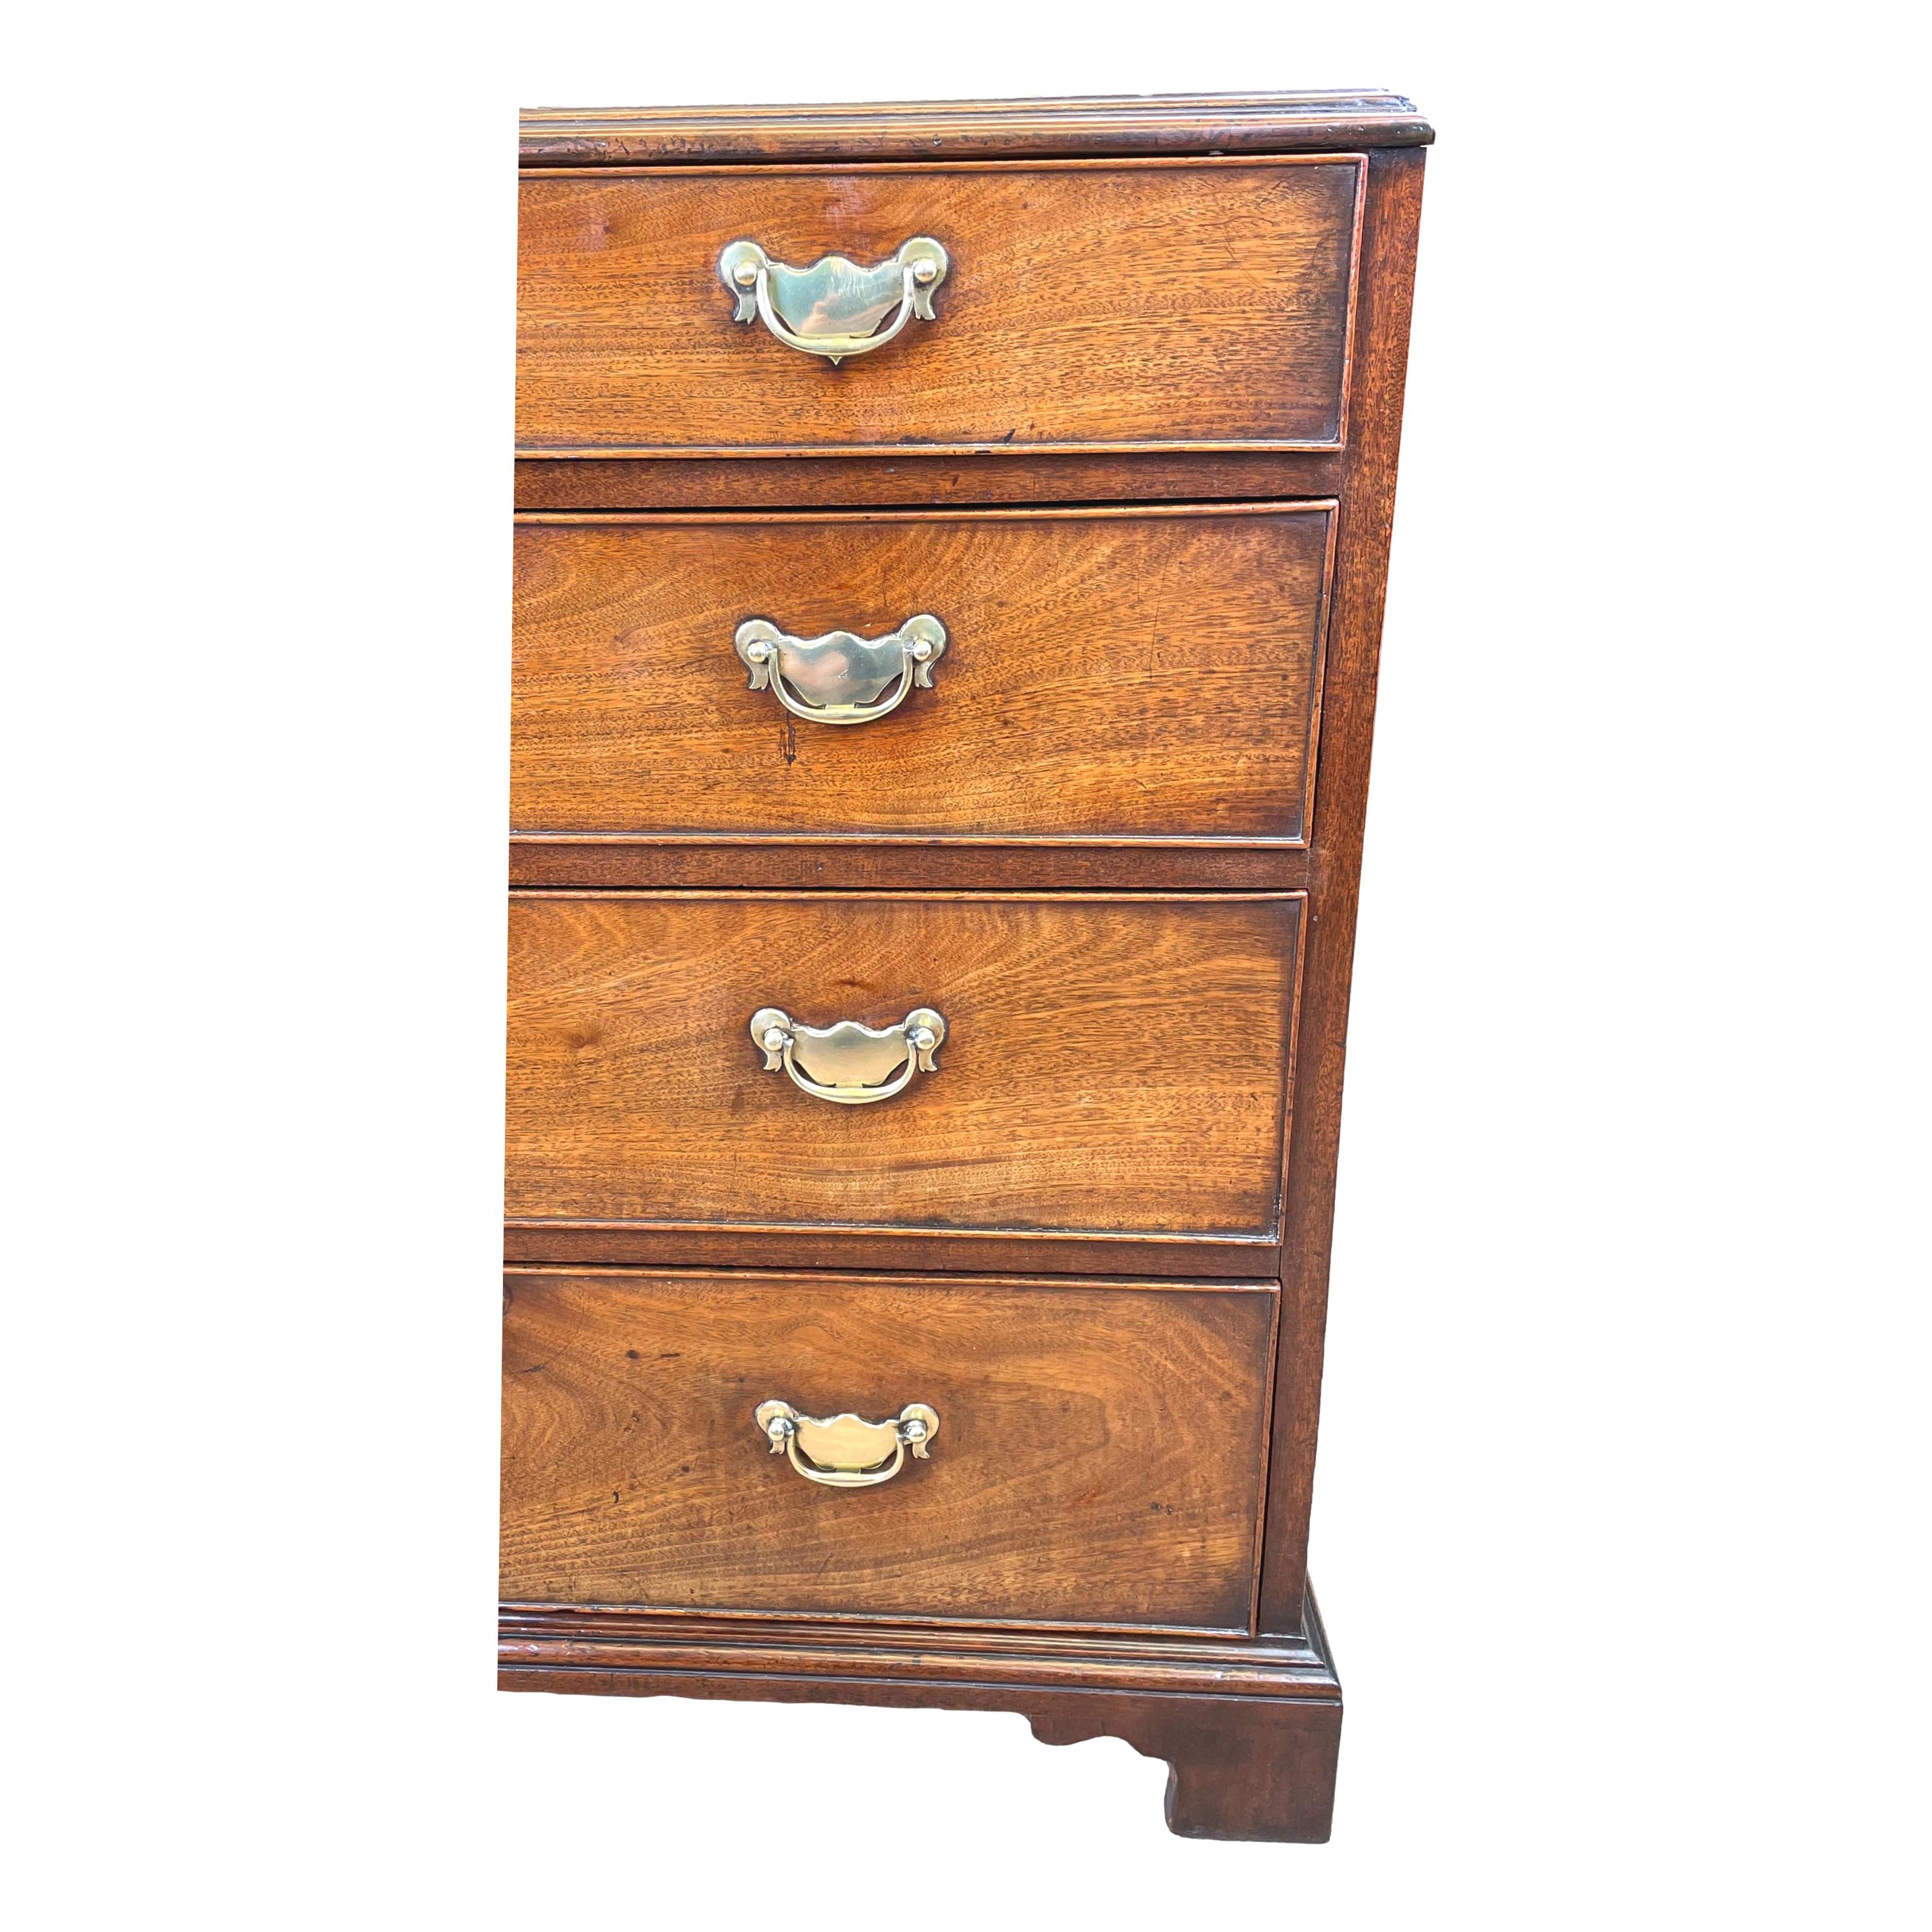 A very good quality mid 19th century small Georgian
Mahogany chest having well figured top with part
Caddy moulded edge over four long drawers
Retaining original brasswear raised on
Original shaped bracket feet

(This sweet, diminutive chest